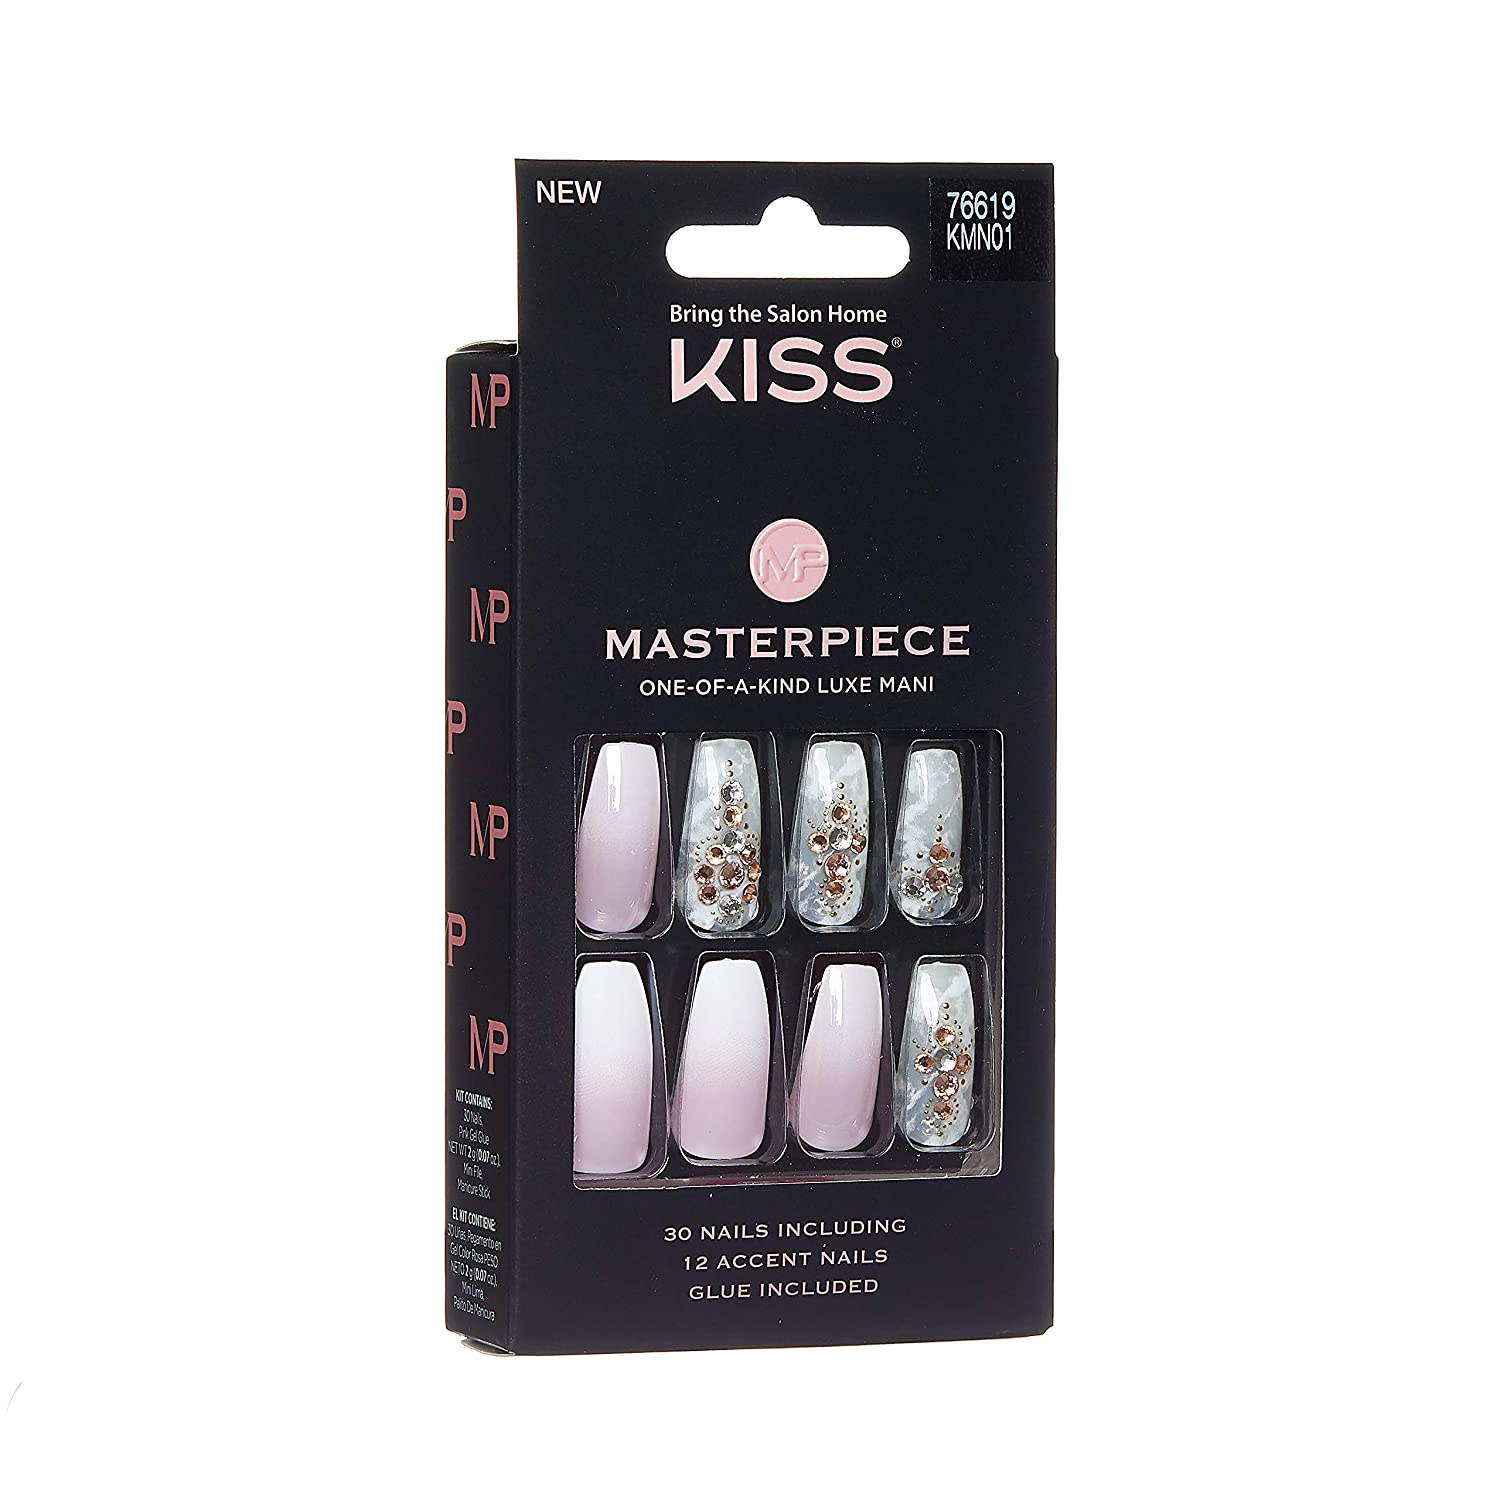 Kiss Masterpiece One-Of-A-Kind Luxe Mani Nails w/Glue (KMN01) – E.138th ...